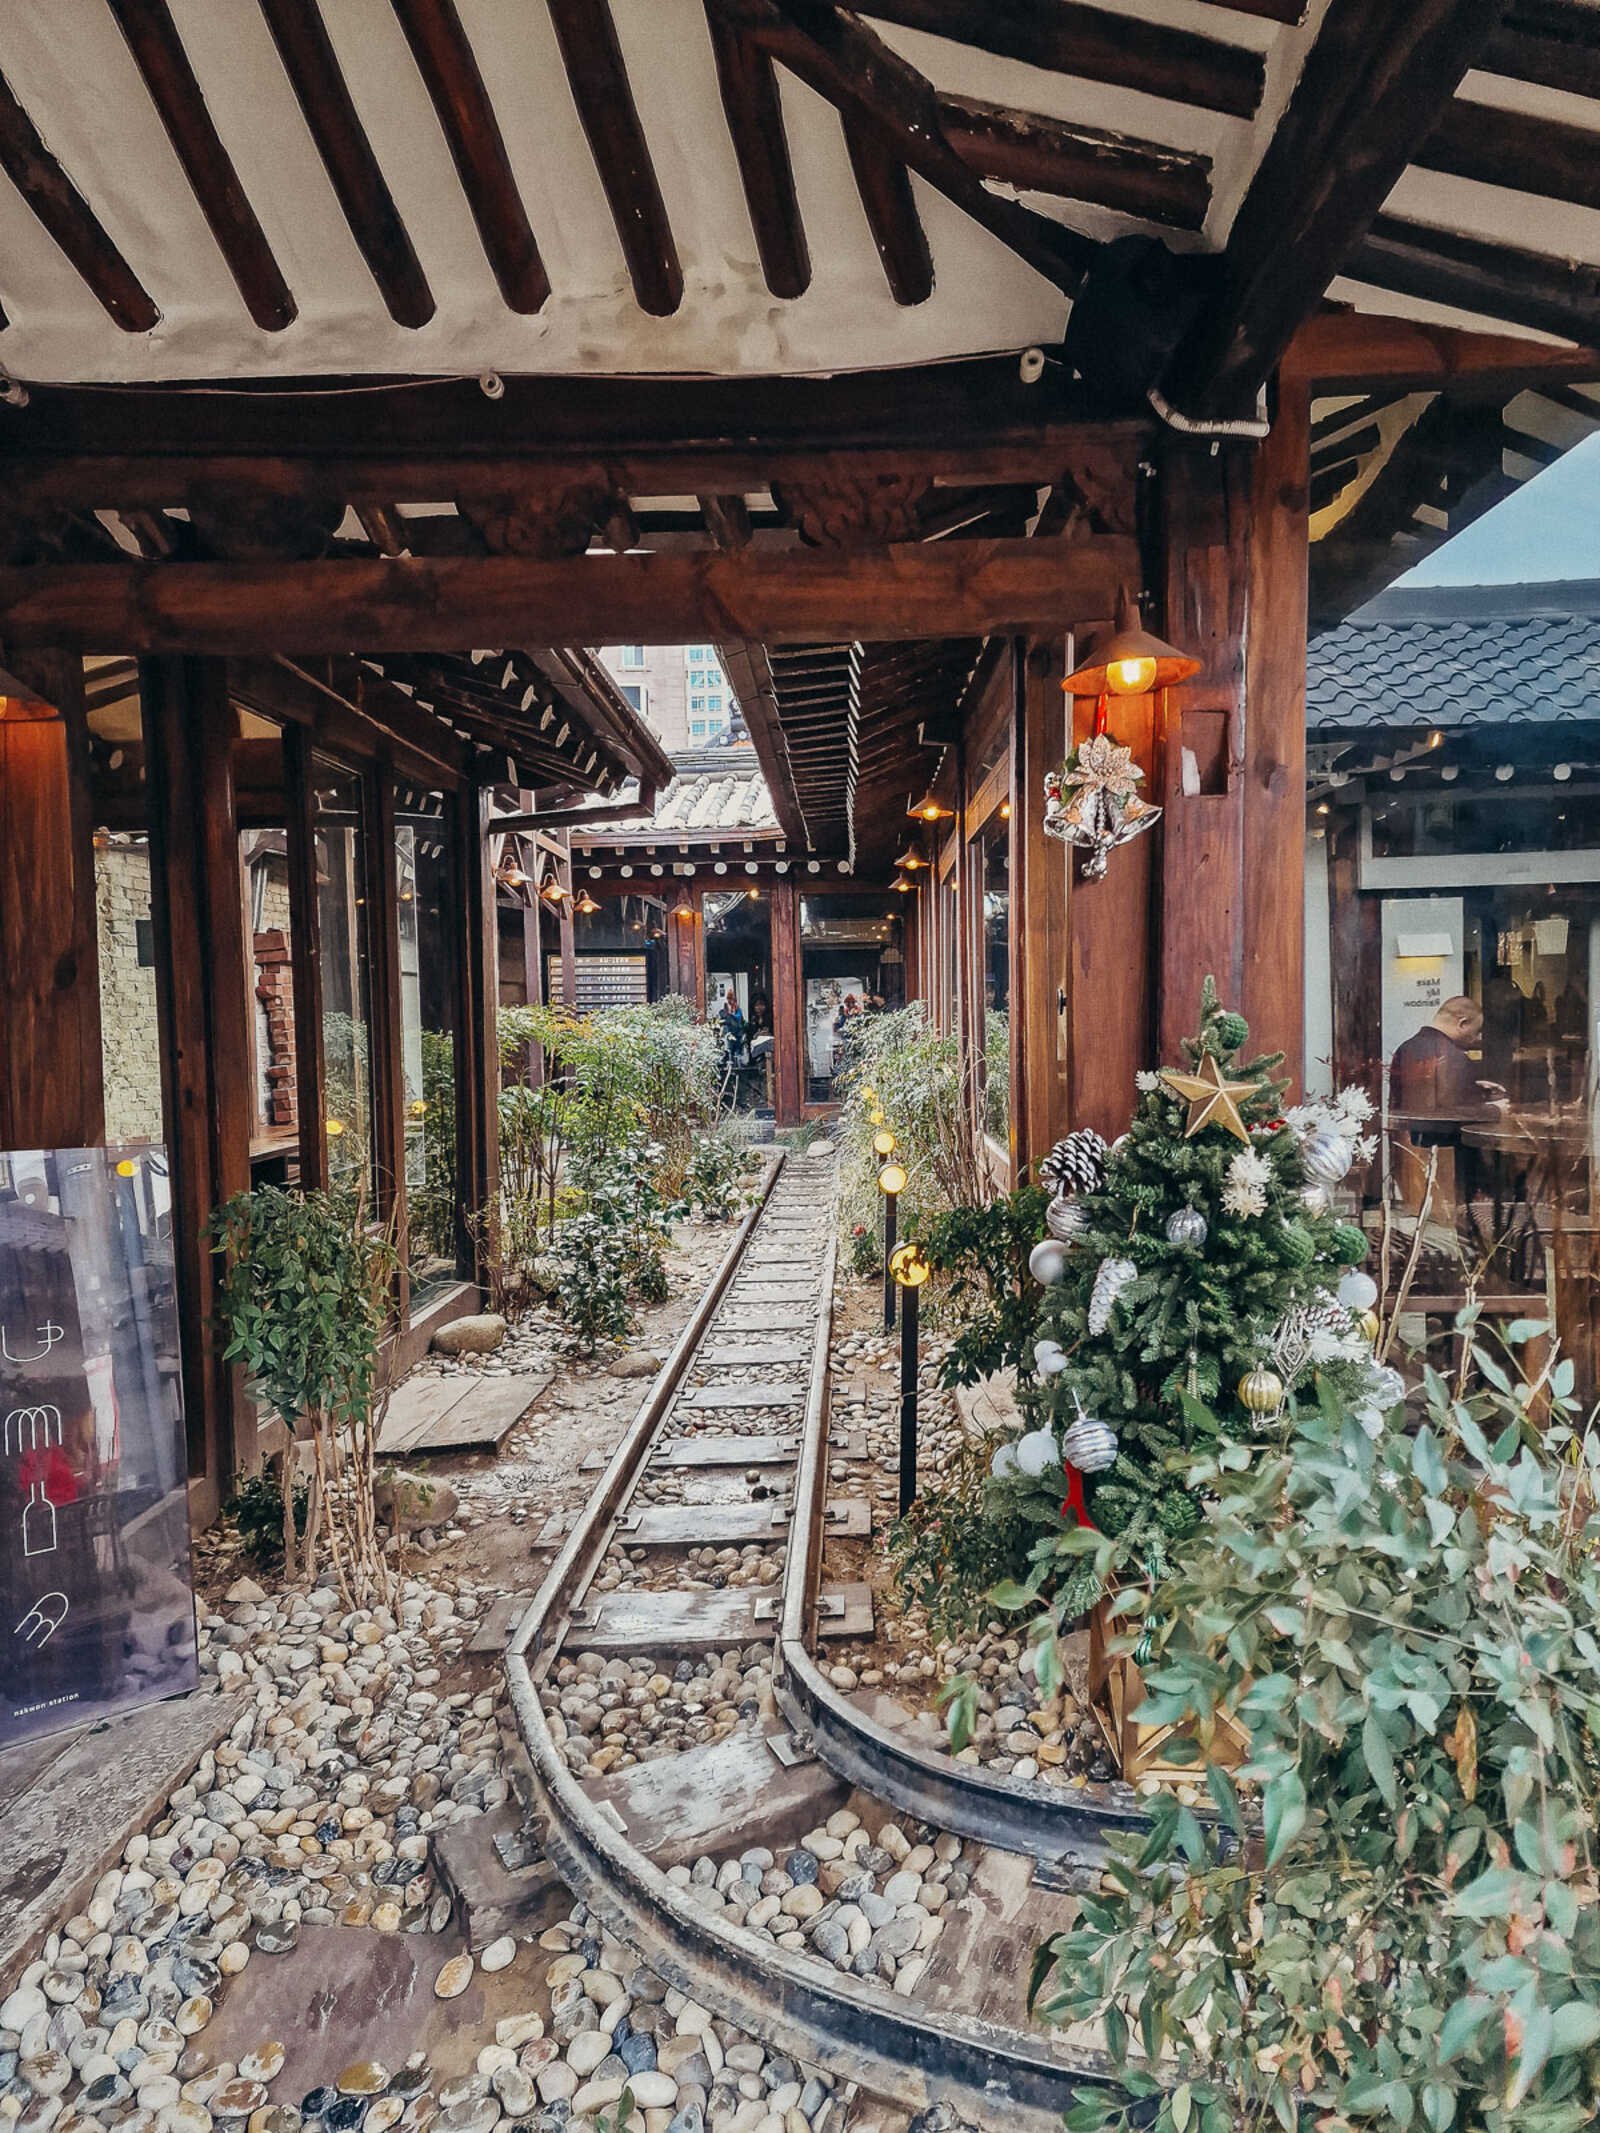 a cafe in a traditional wooden building in South Korea with a train track running through it